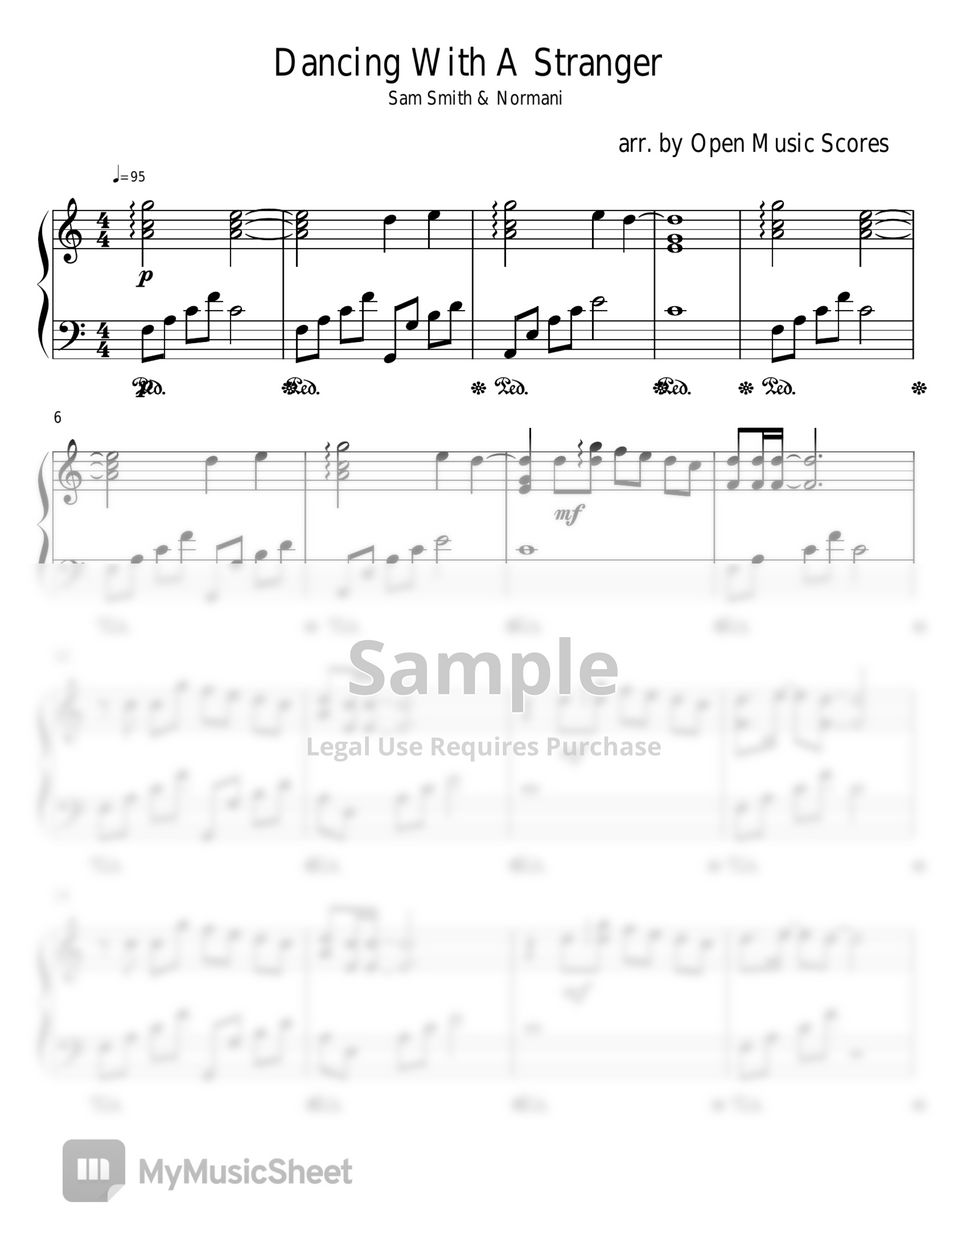 Sam Smith - Dancing with a Stranger(Easy) by Open Music Score